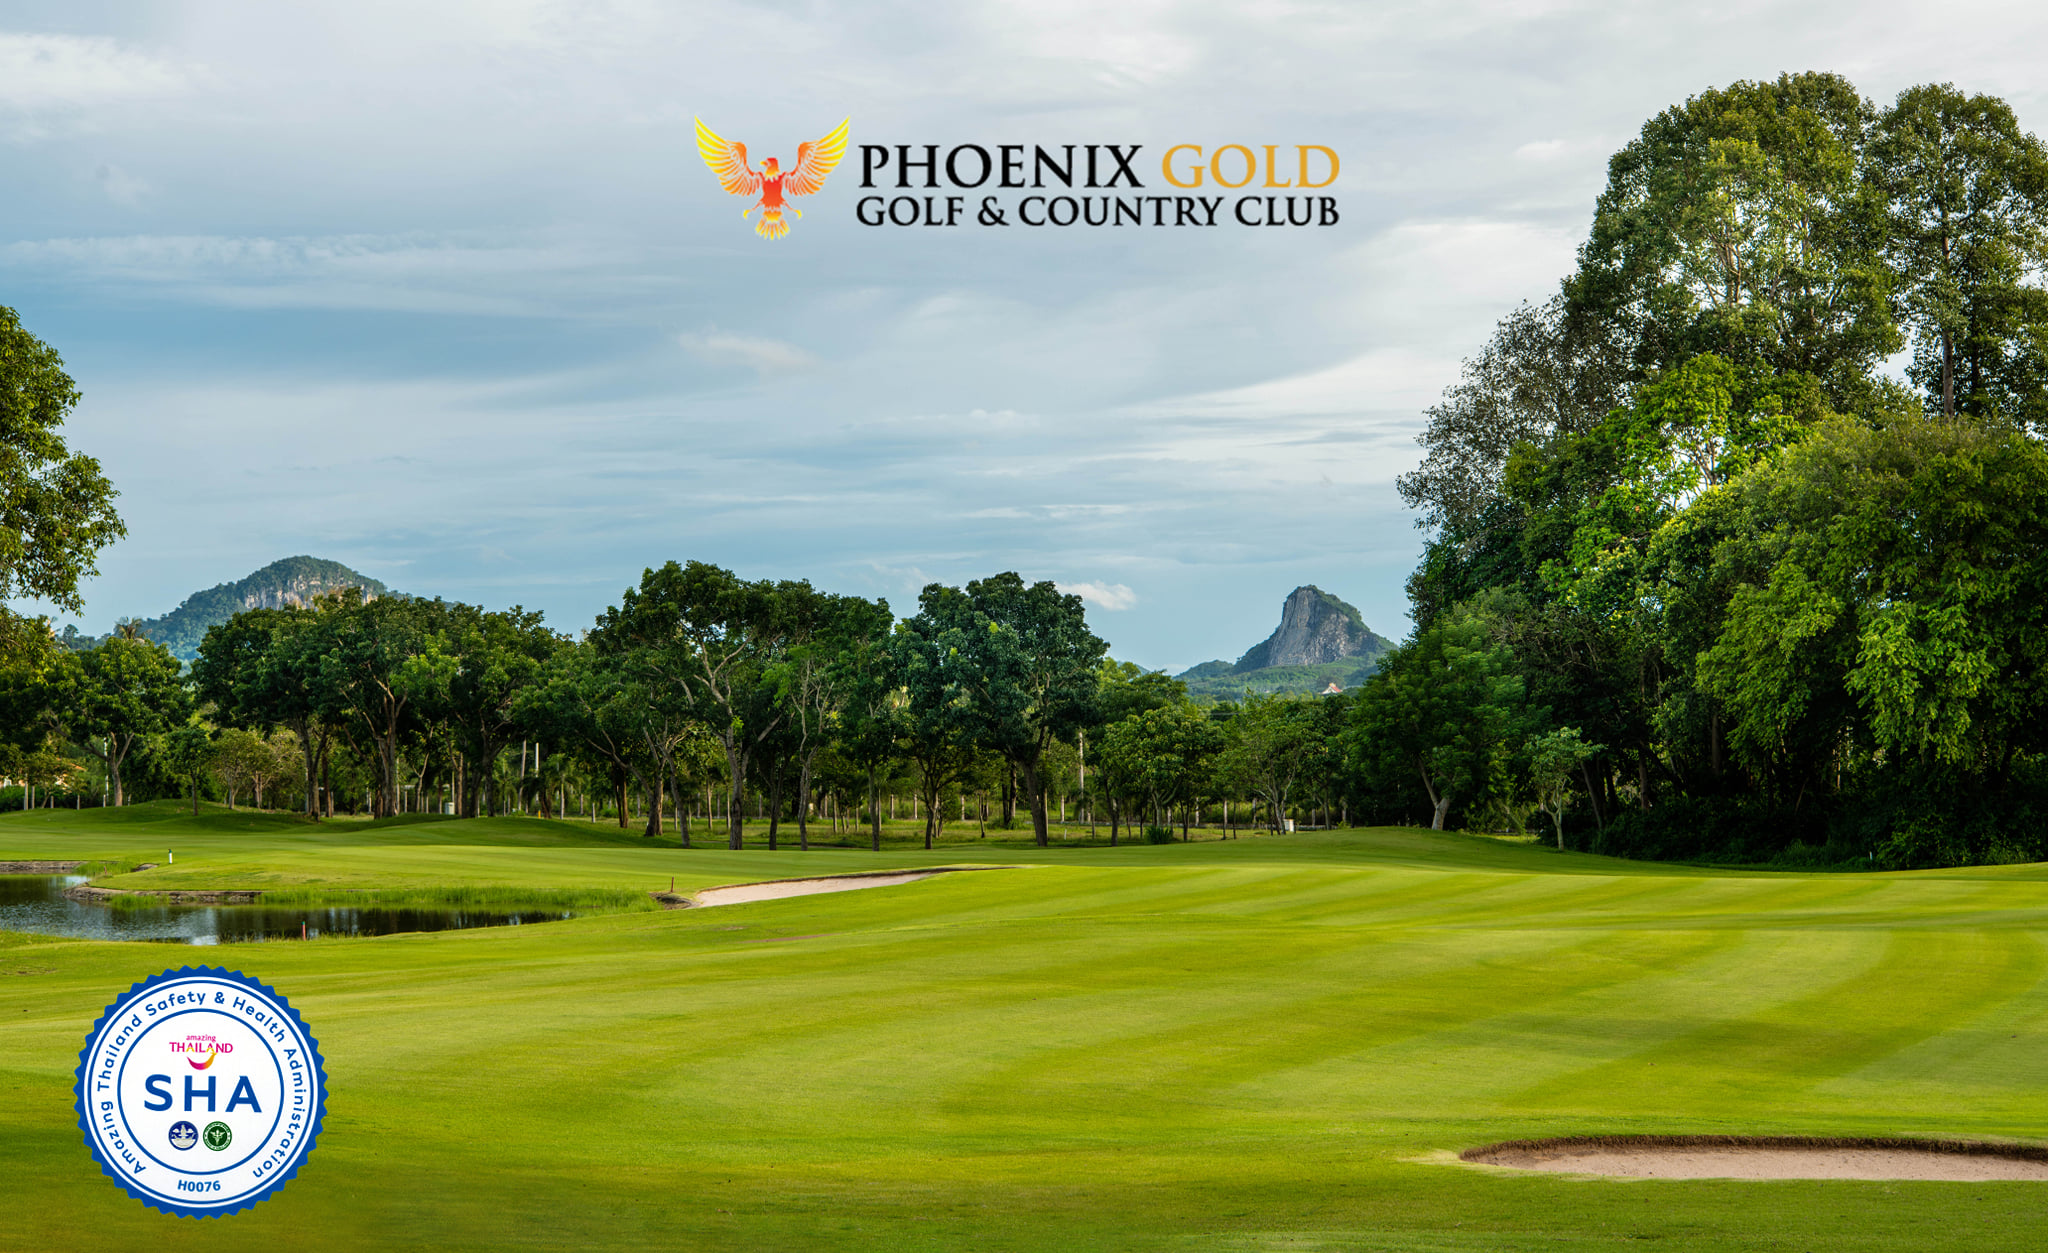 Phoenix Gold Golf and Country Club - Pattaya Golf Course: Discount